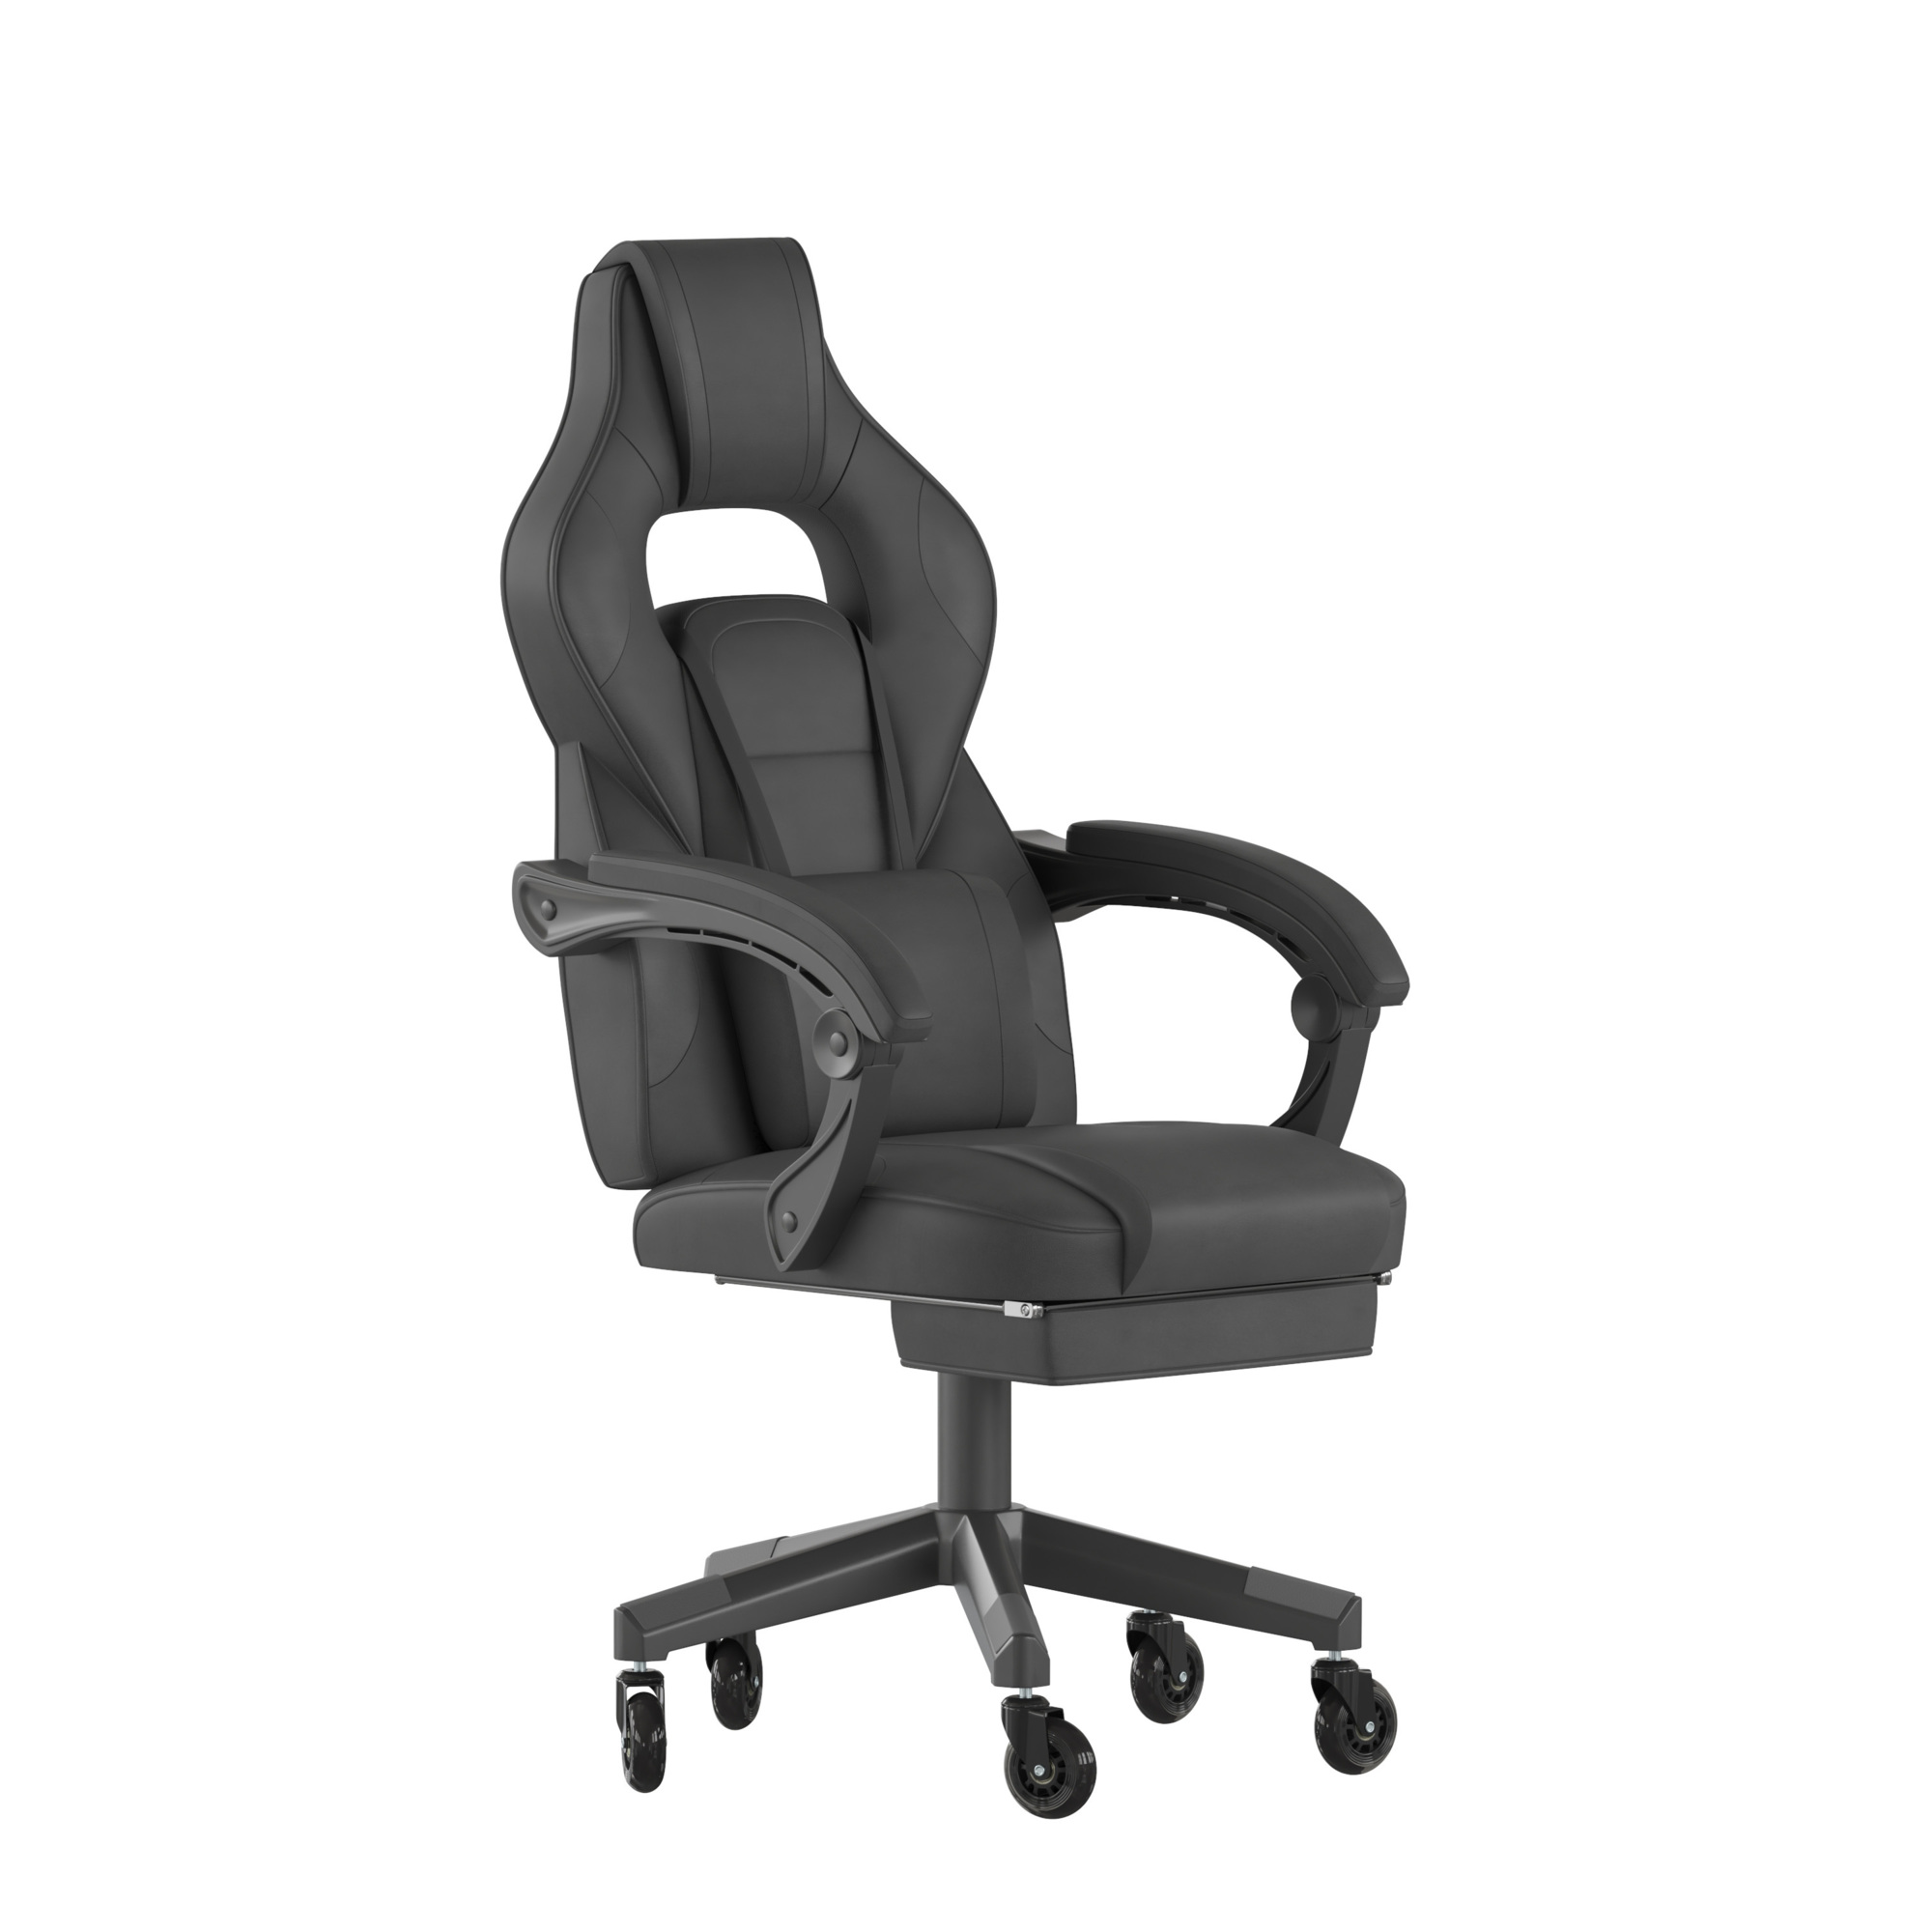 Flash Furniture, Black LeatherSoft Gaming Chair with Skater Wheels, Primary Color Black, Included (qty.) 2, Model CH00288BKBKRLB